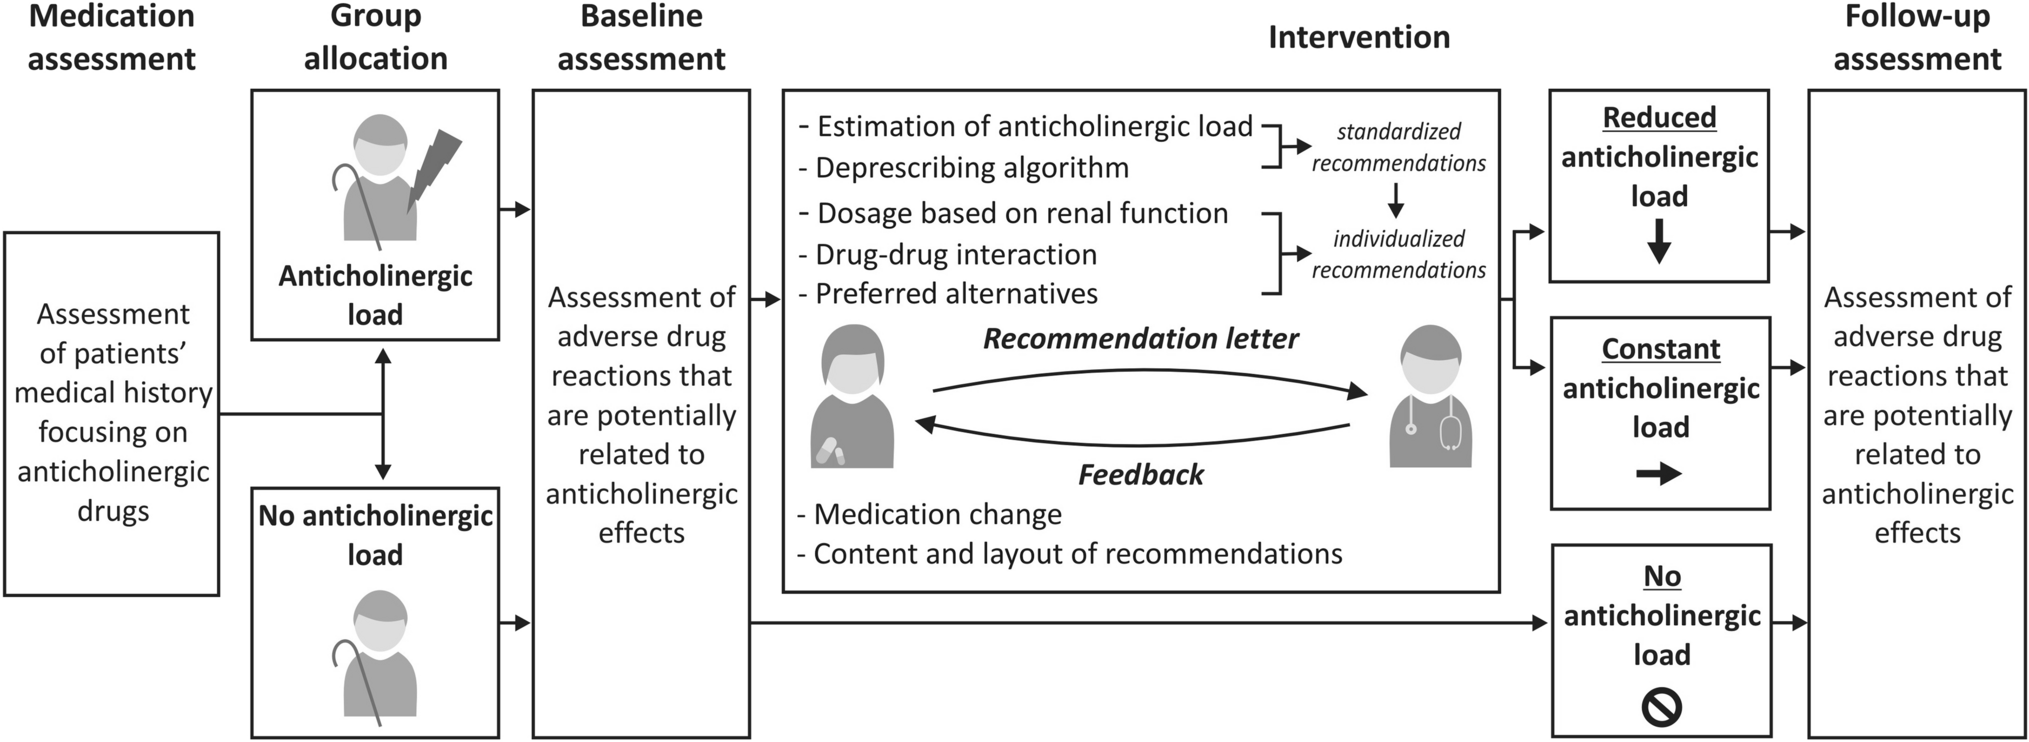 Development and Pilot Testing of an Algorithm-Based Approach to Anticholinergic Deprescribing in Older Patients